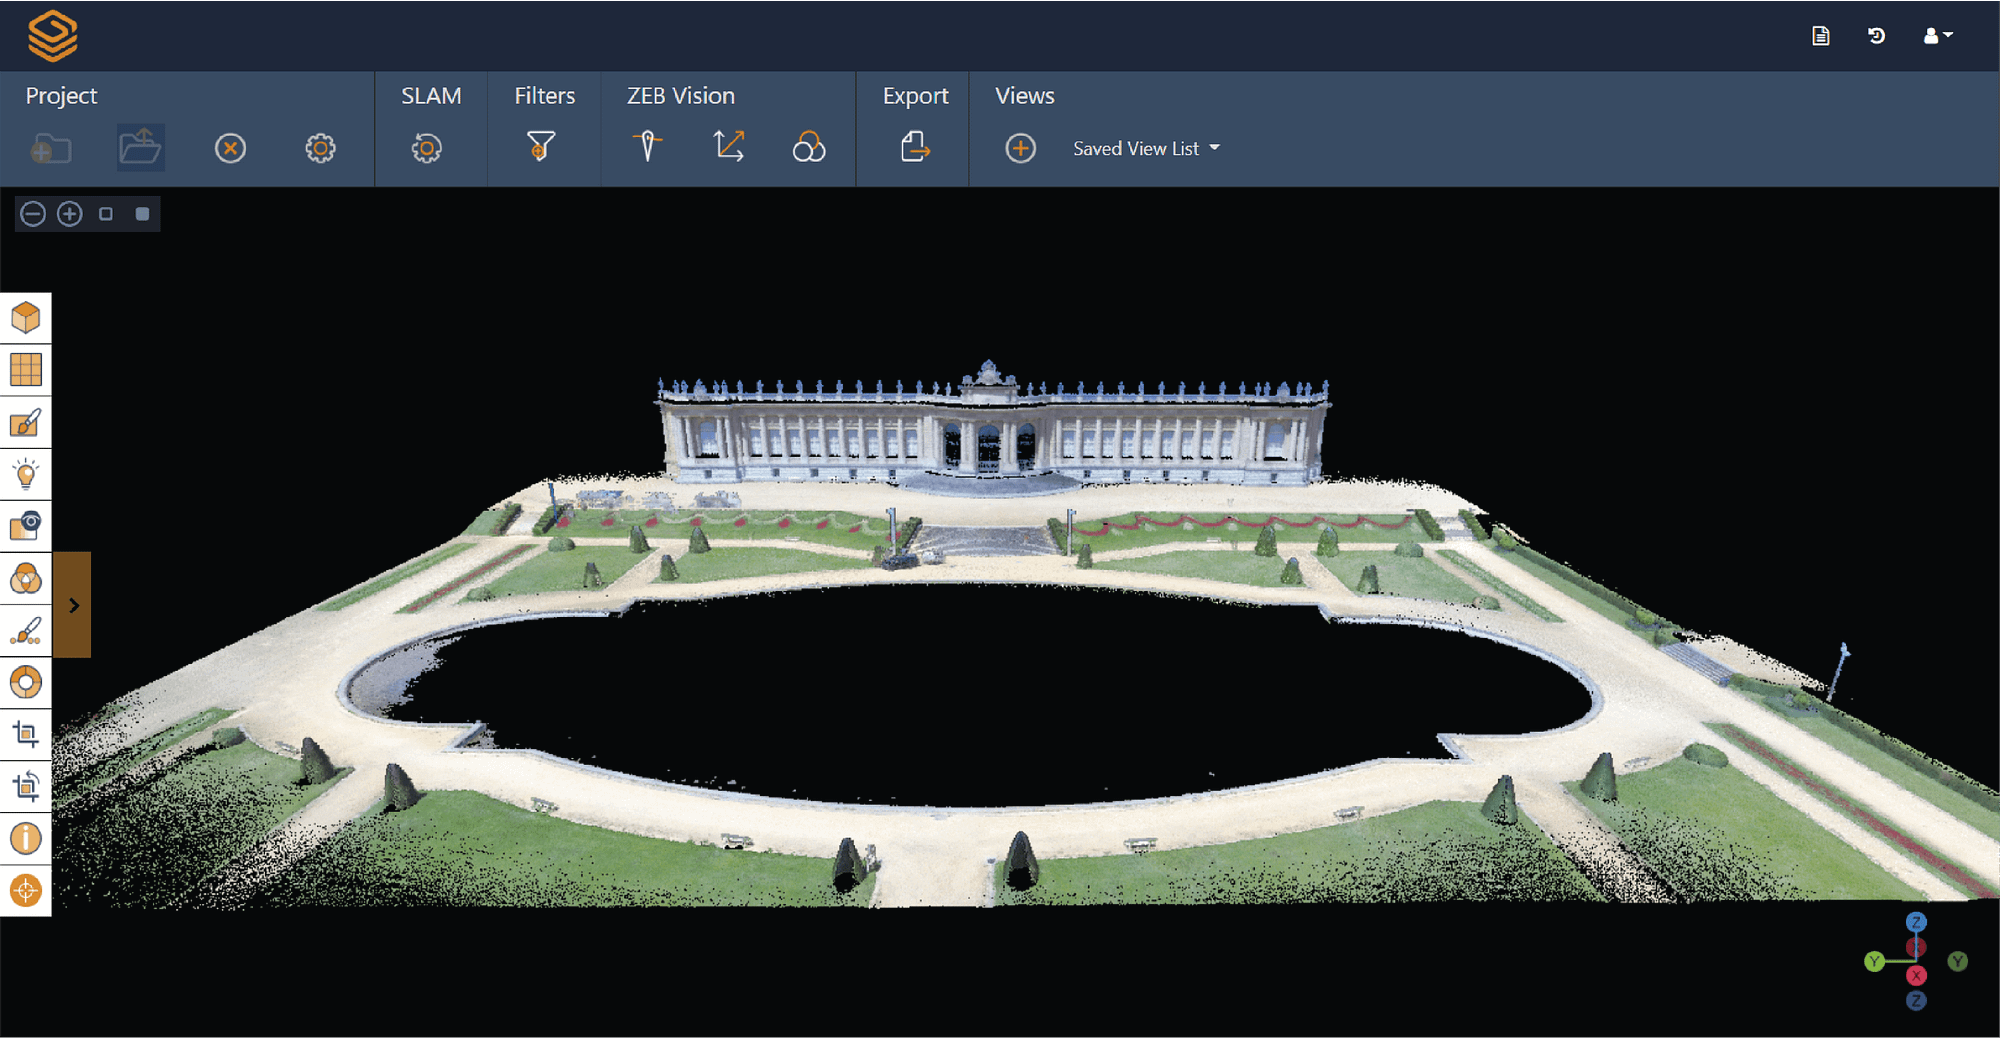 ZEB Vision data of Africa Palace